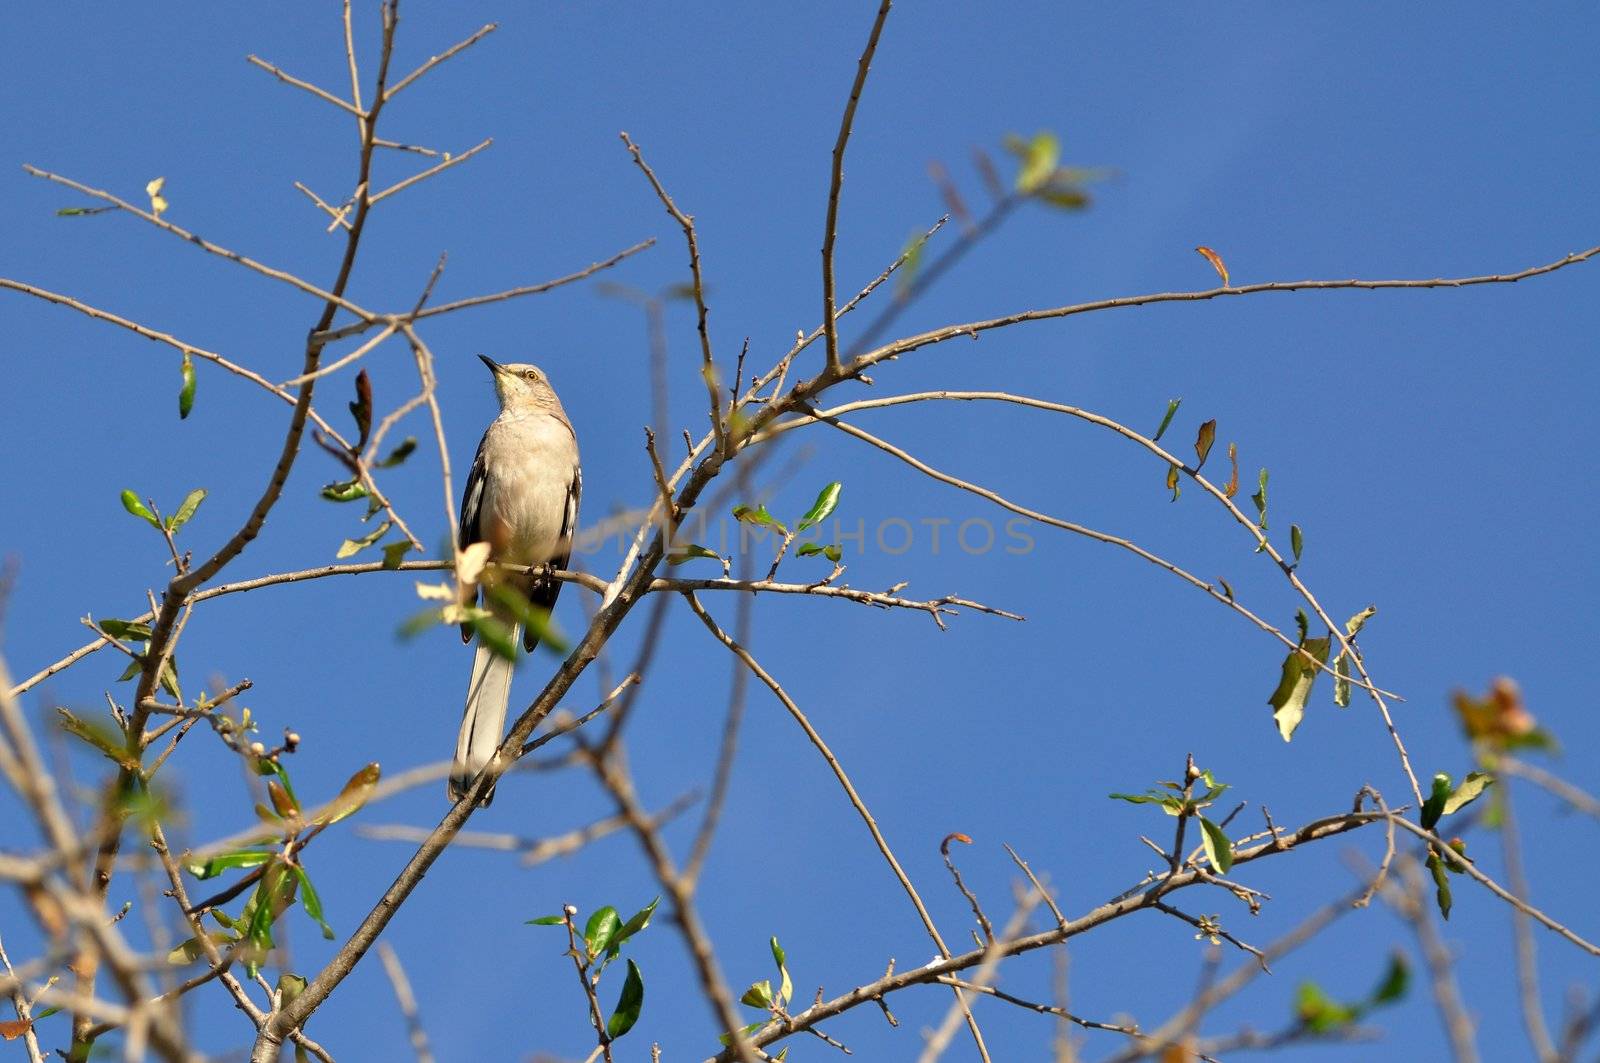 A common mockingbird (Mimus polyglottos), the official bird of the State of Florida, is perched atop a Miami backyard tree.